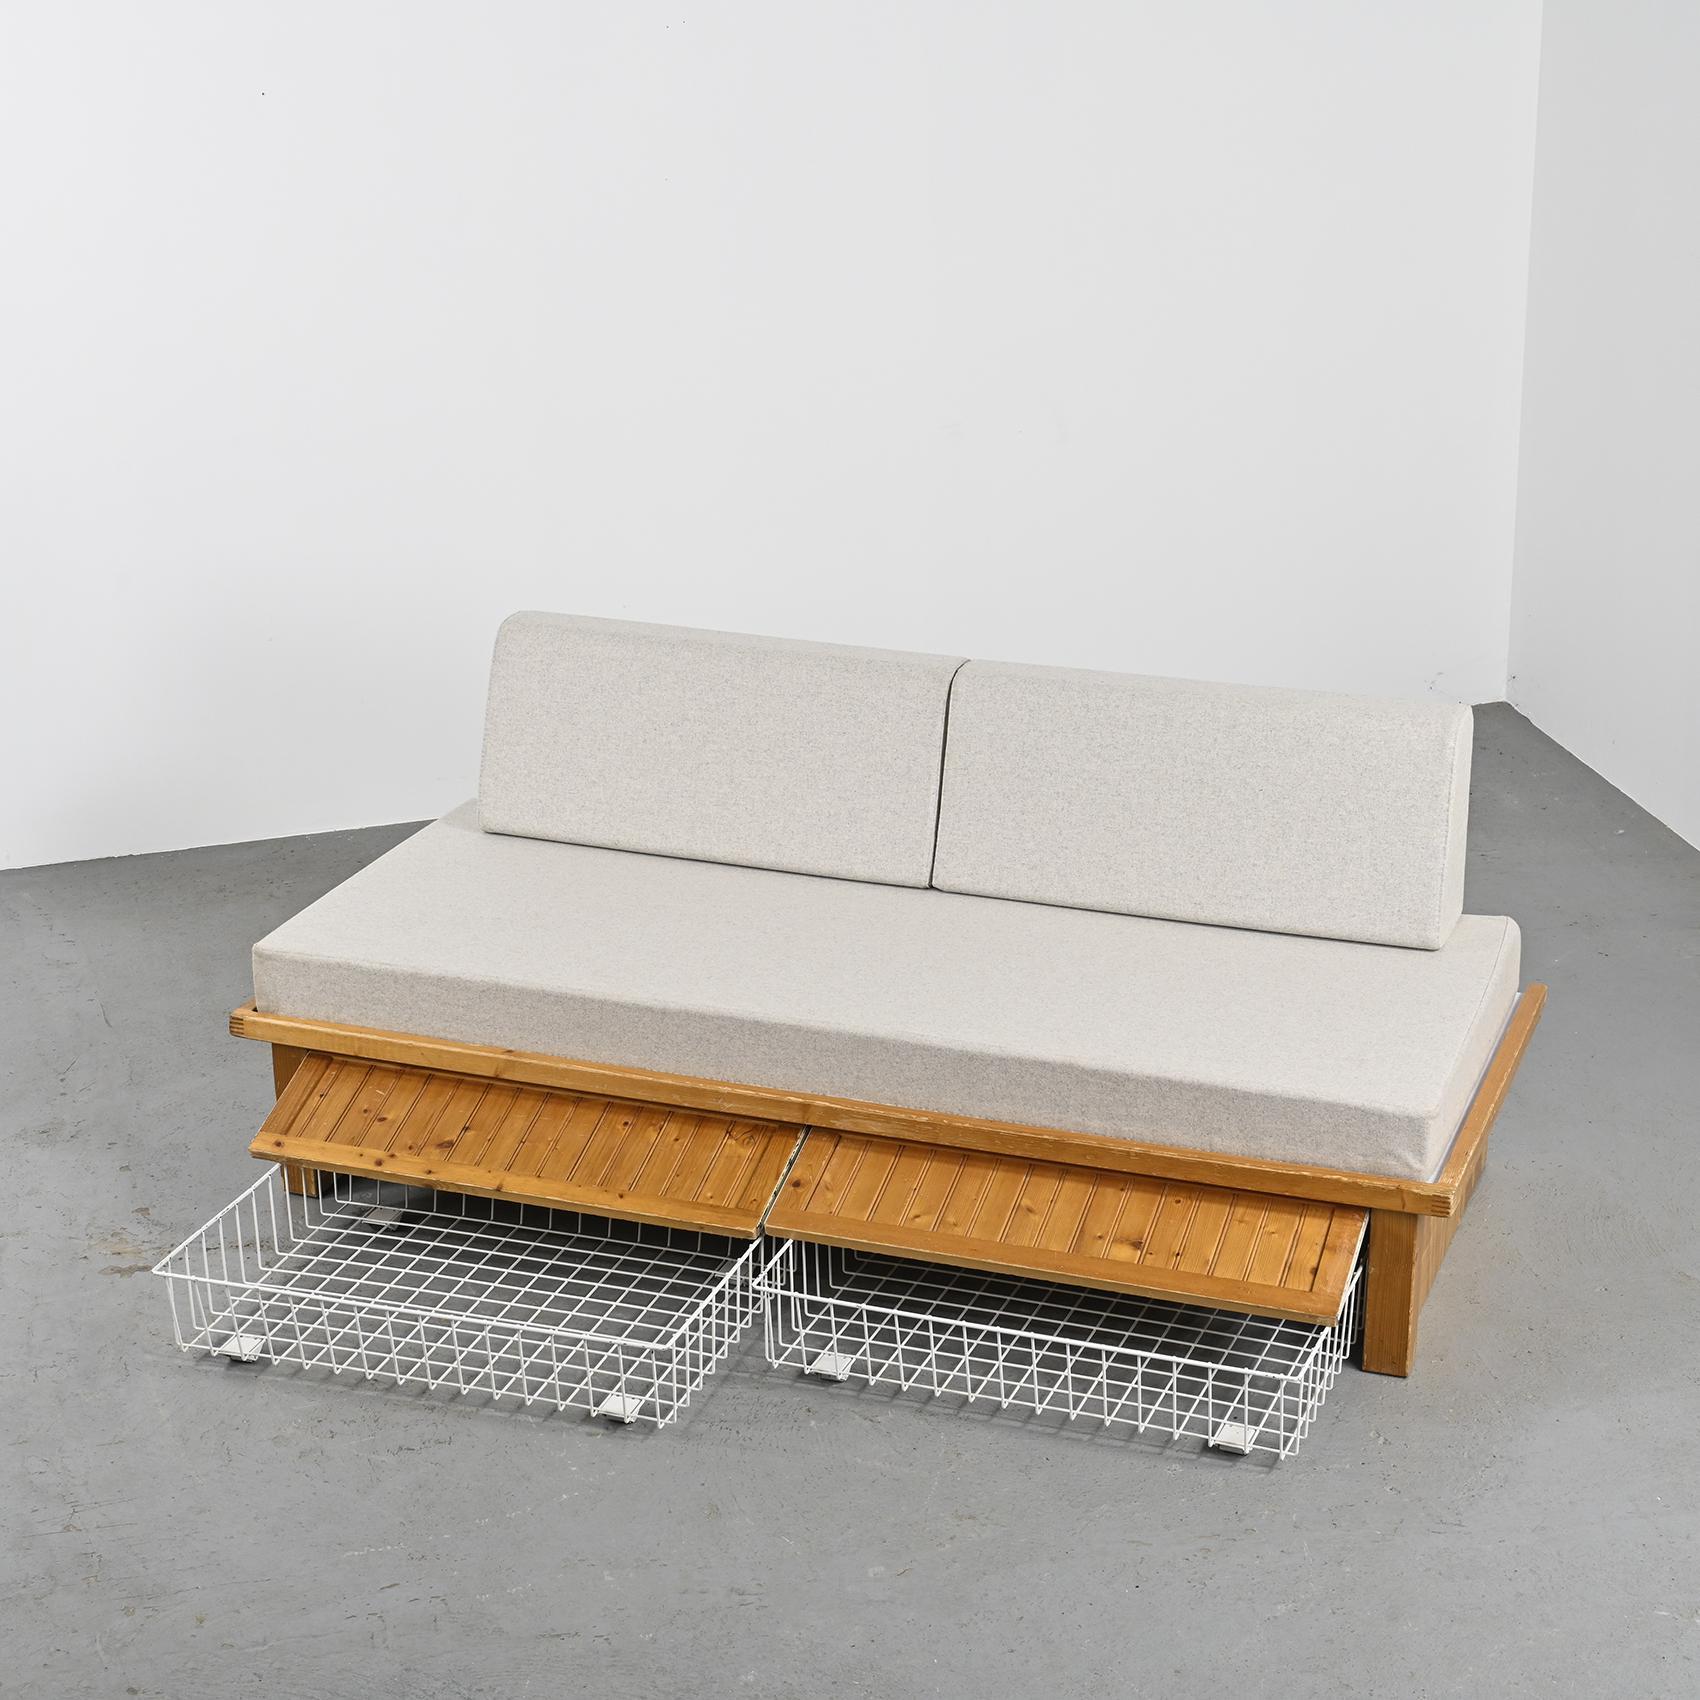 A bench or bed that equipped the flats of the Nova residence in Les Arcs, furbished by Charlotte Perriand.
 
The pine slatted base structure contains two rolling drawers accessible through a flap. The bench seat has a mattress and foam cushions